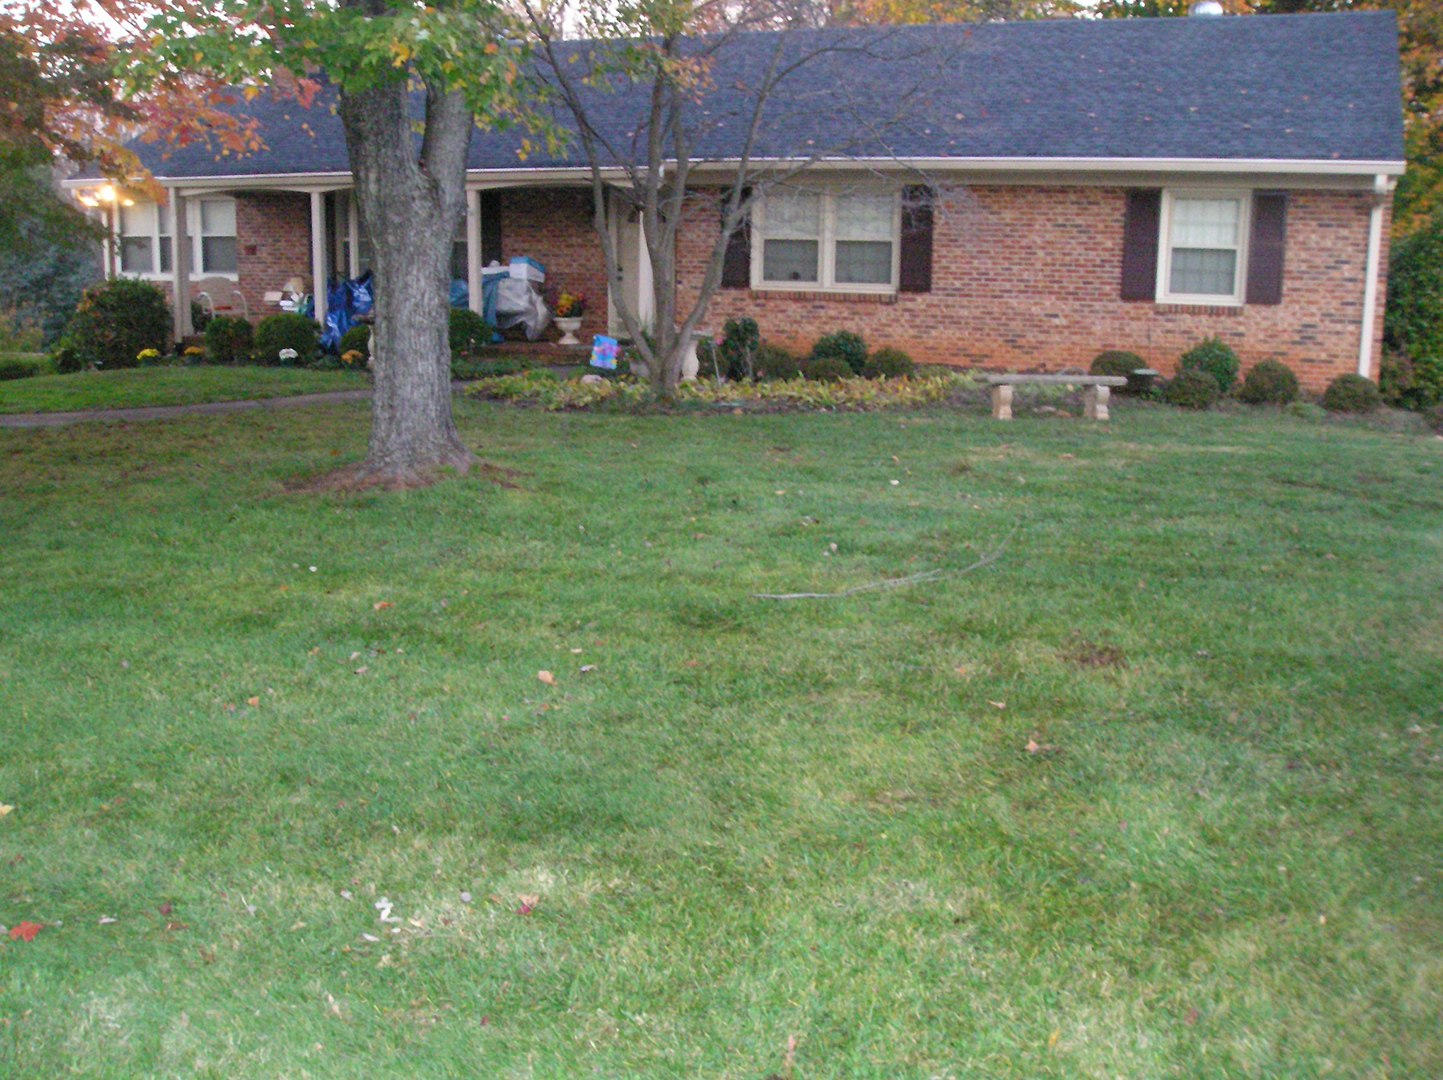 House and lawn after leaf removal by ADC Lawncare